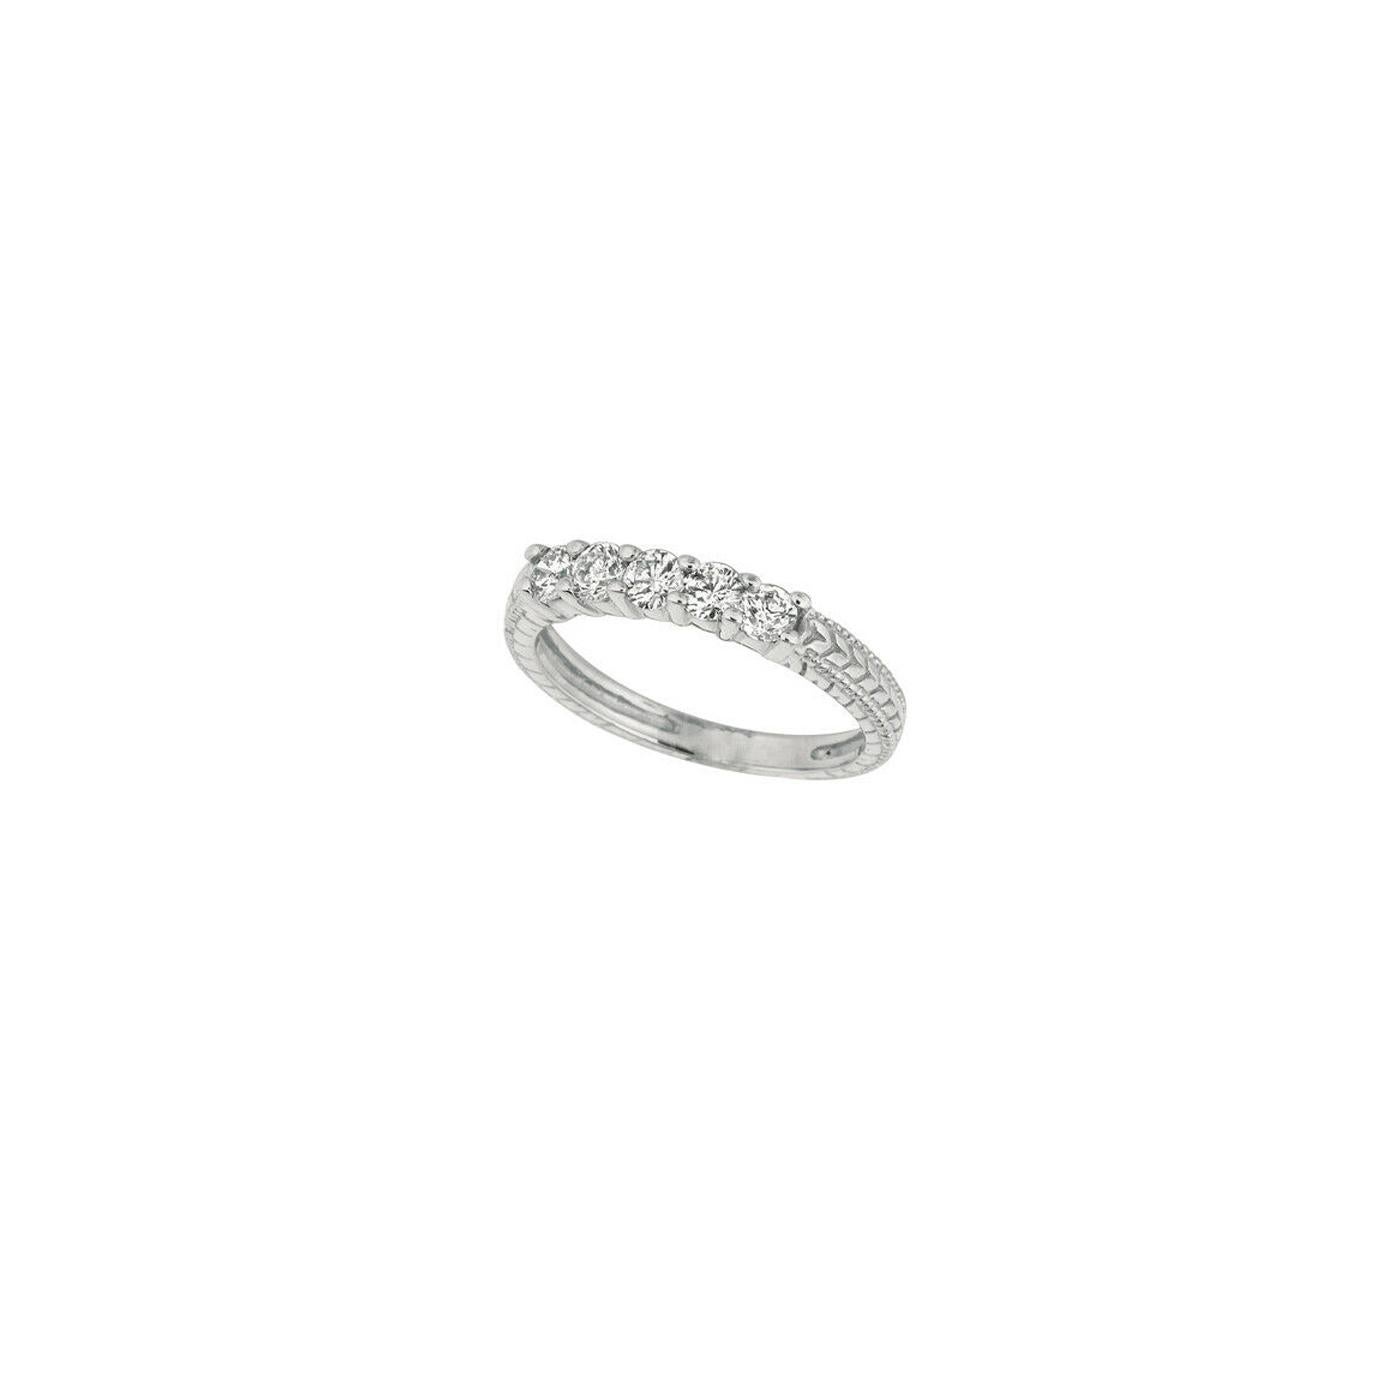 For Sale:  1.00 Carat Natural 5 Stone Diamond Ring Band 14K White Gold 3